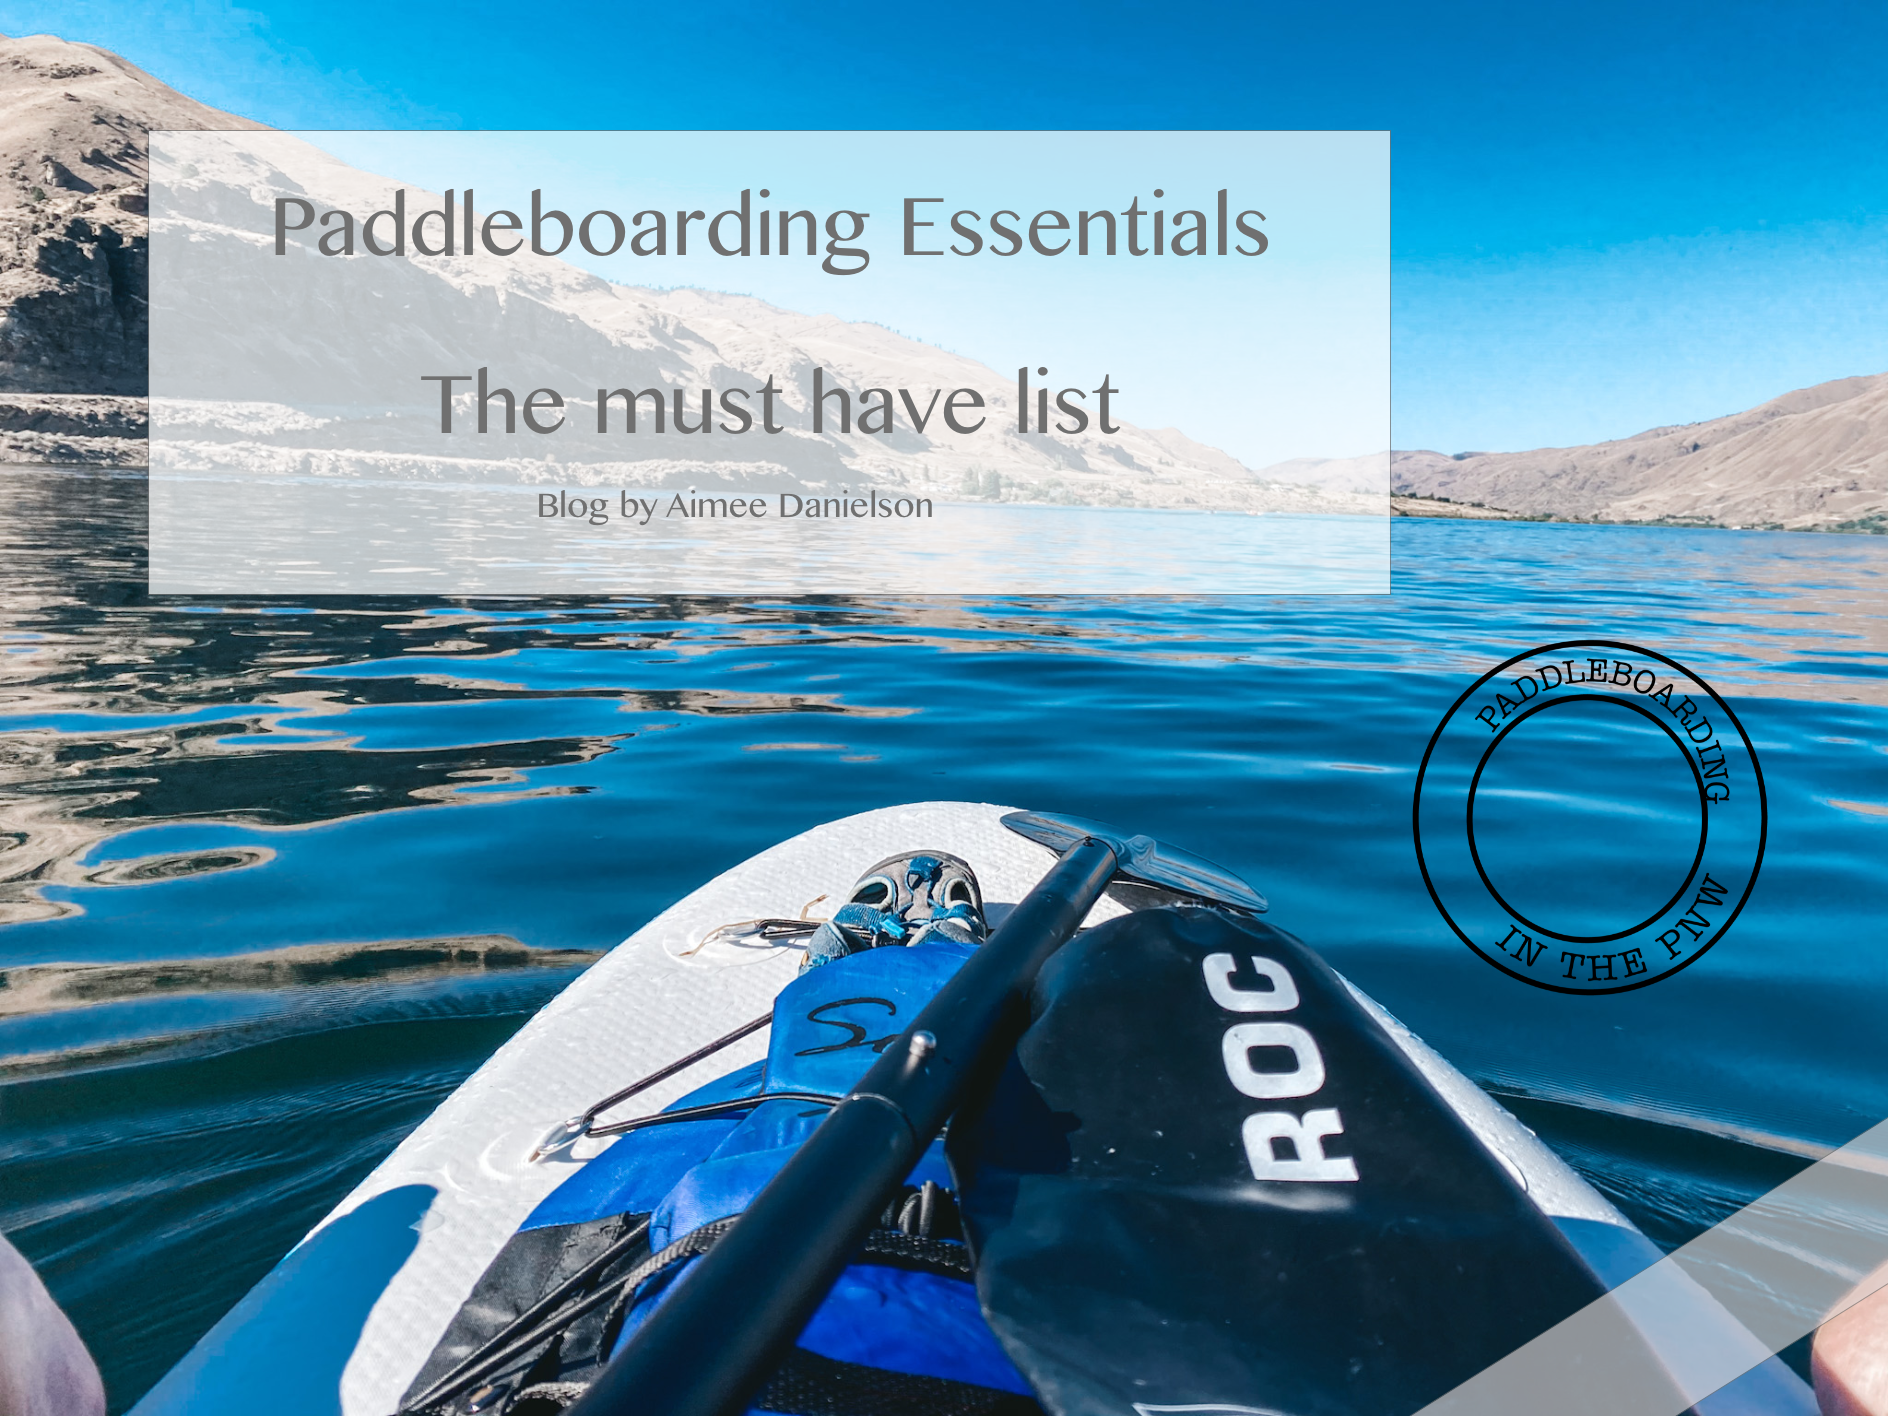 Paddleboarding tips and locations in the Pacific Northwest PNW